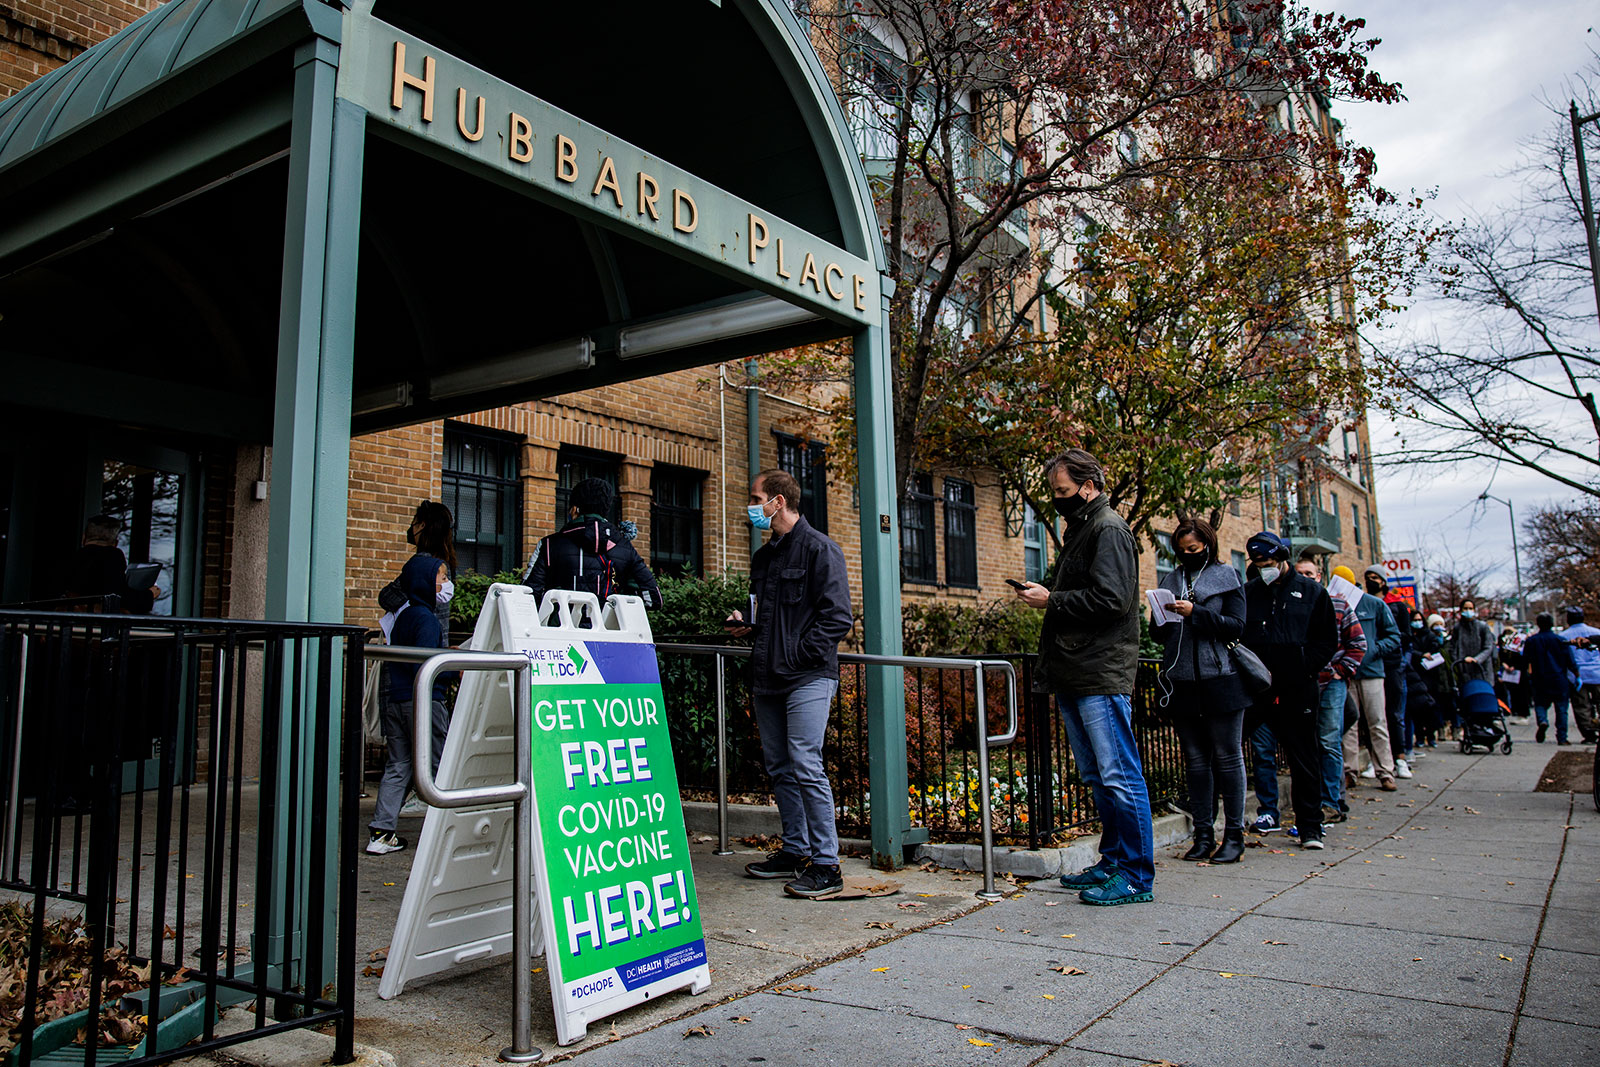 People line up outside a Covid-19 vaccination site in Washington, DC, on December 3.